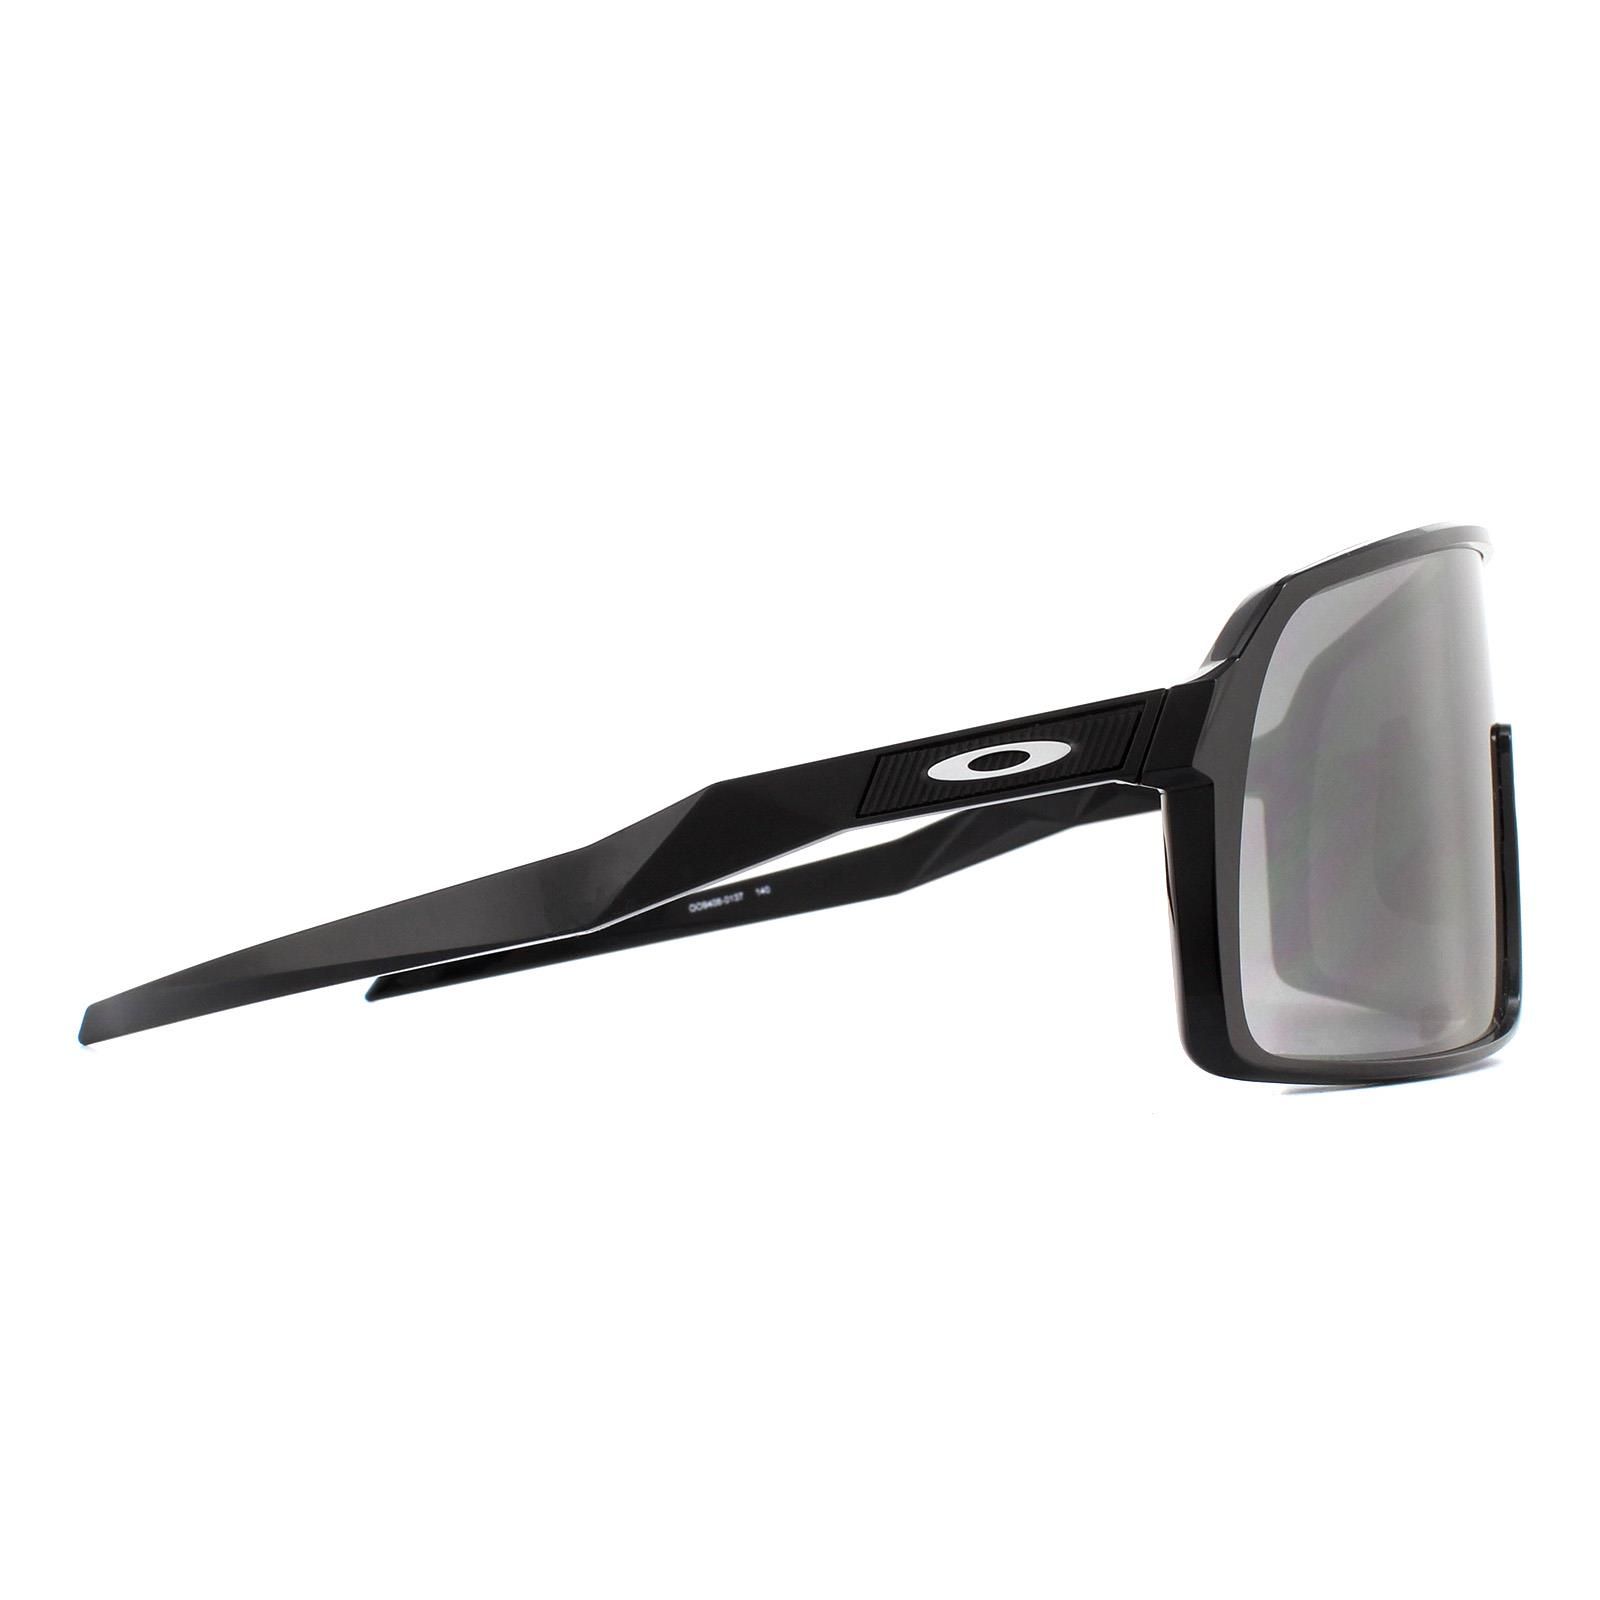 Oakley Sunglasses Sutro OO9406-01 Polished Black Prizm Black designed with performance in mind, Sutro is a versatile model for cyclists to wear on and off the bike. Made from lightweight O Matter for all-day comfort and durability. Unobtainium nose pads keep them in securely in place as the grip increases with perspiration.